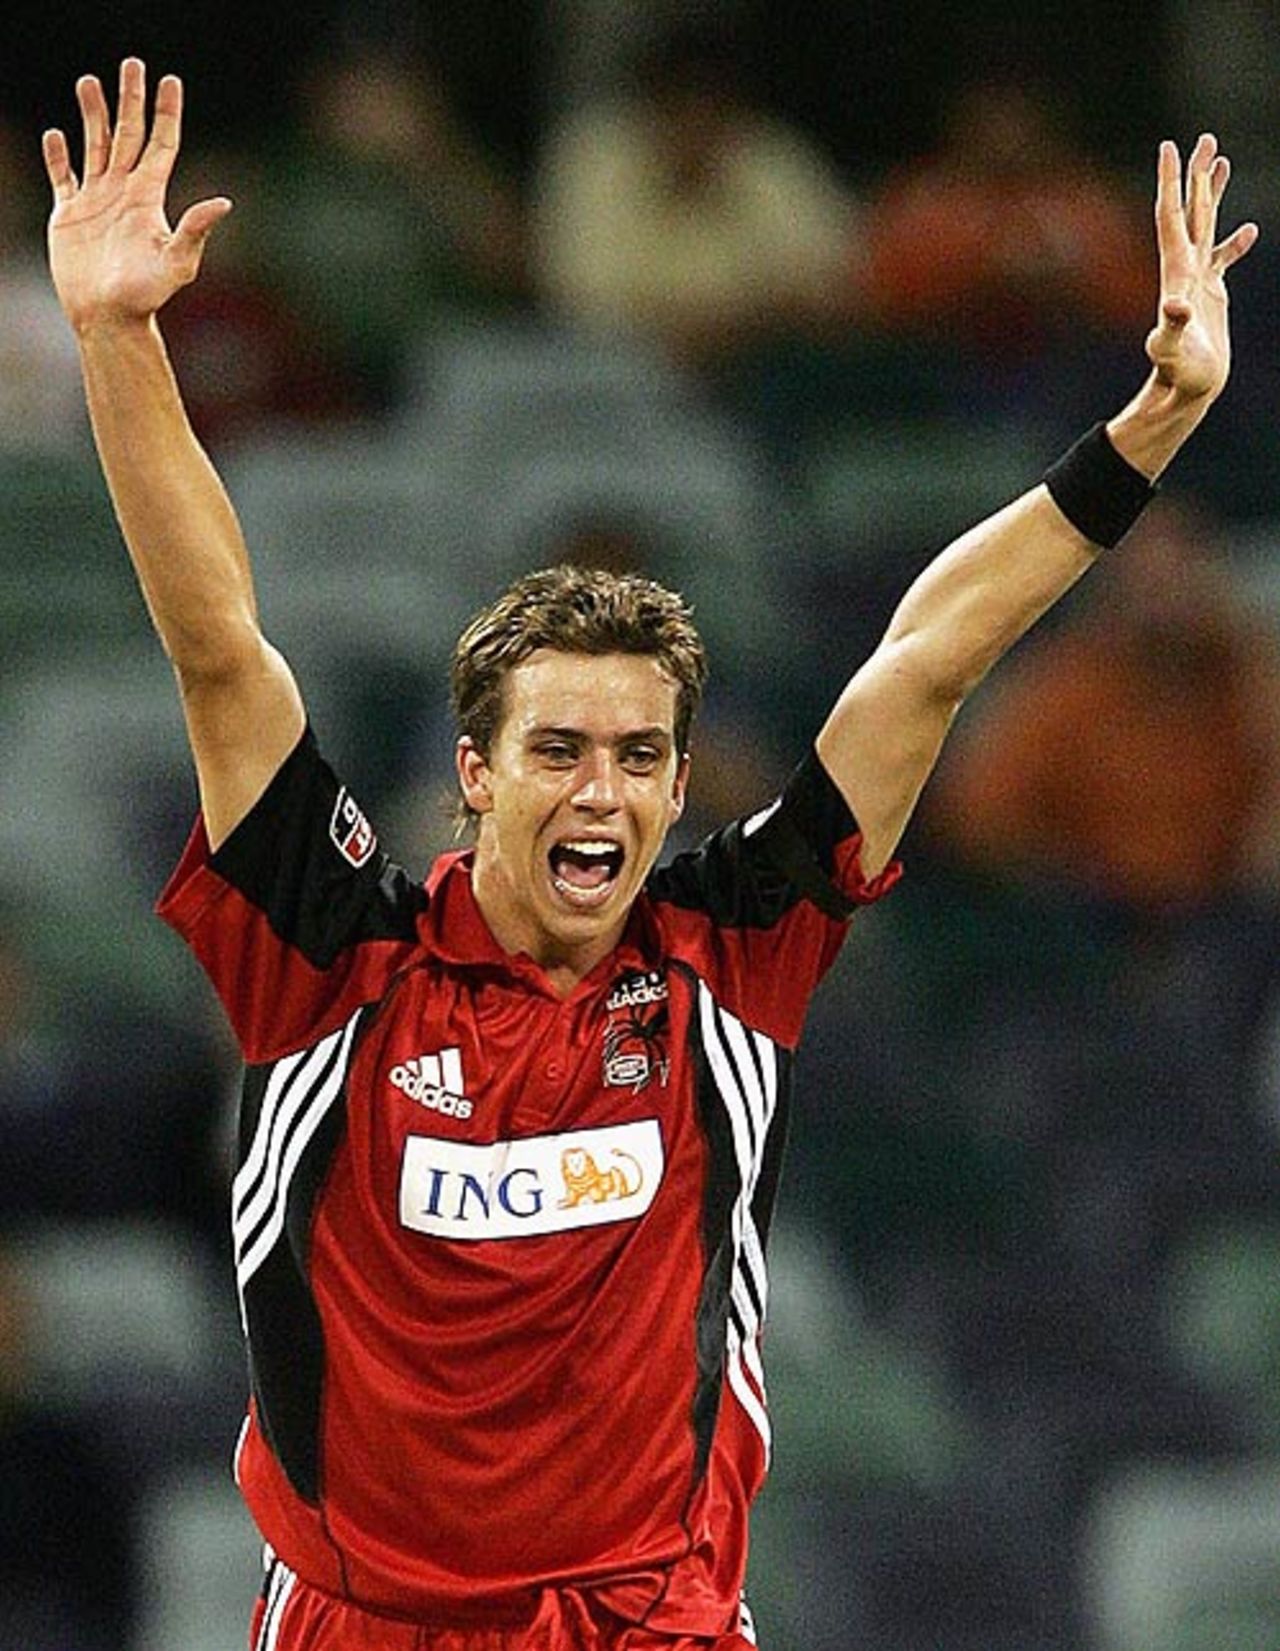 Cullen Bailey celebrates a wicket, Western Australia v South Australia, ING Cup, Perth, January 25, 2006